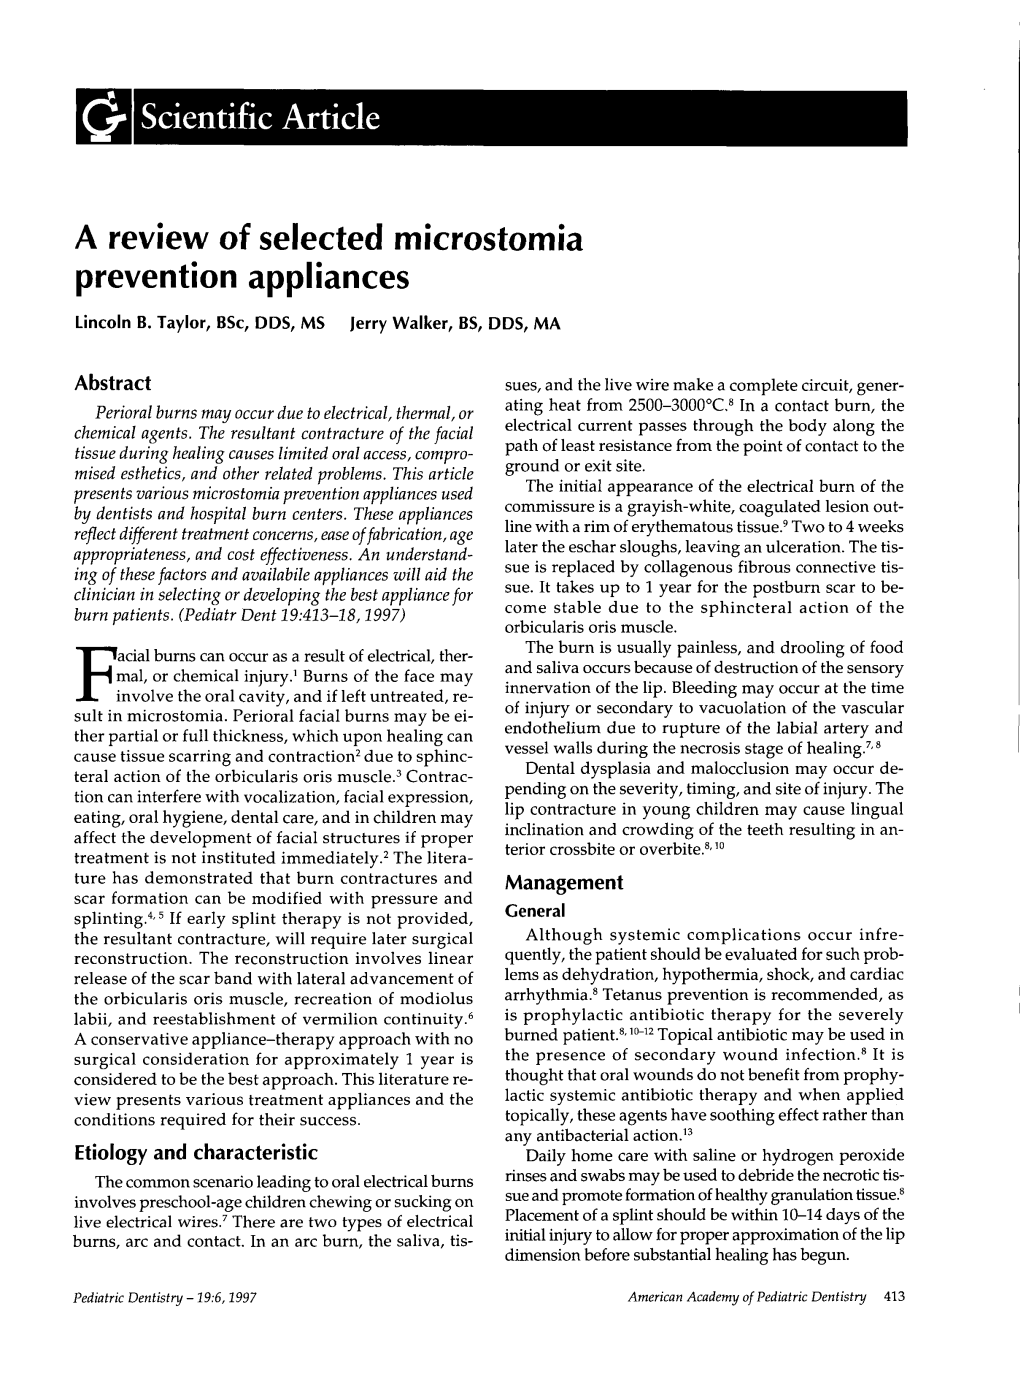 A Review of Selected Microstomia Prevention Appliances